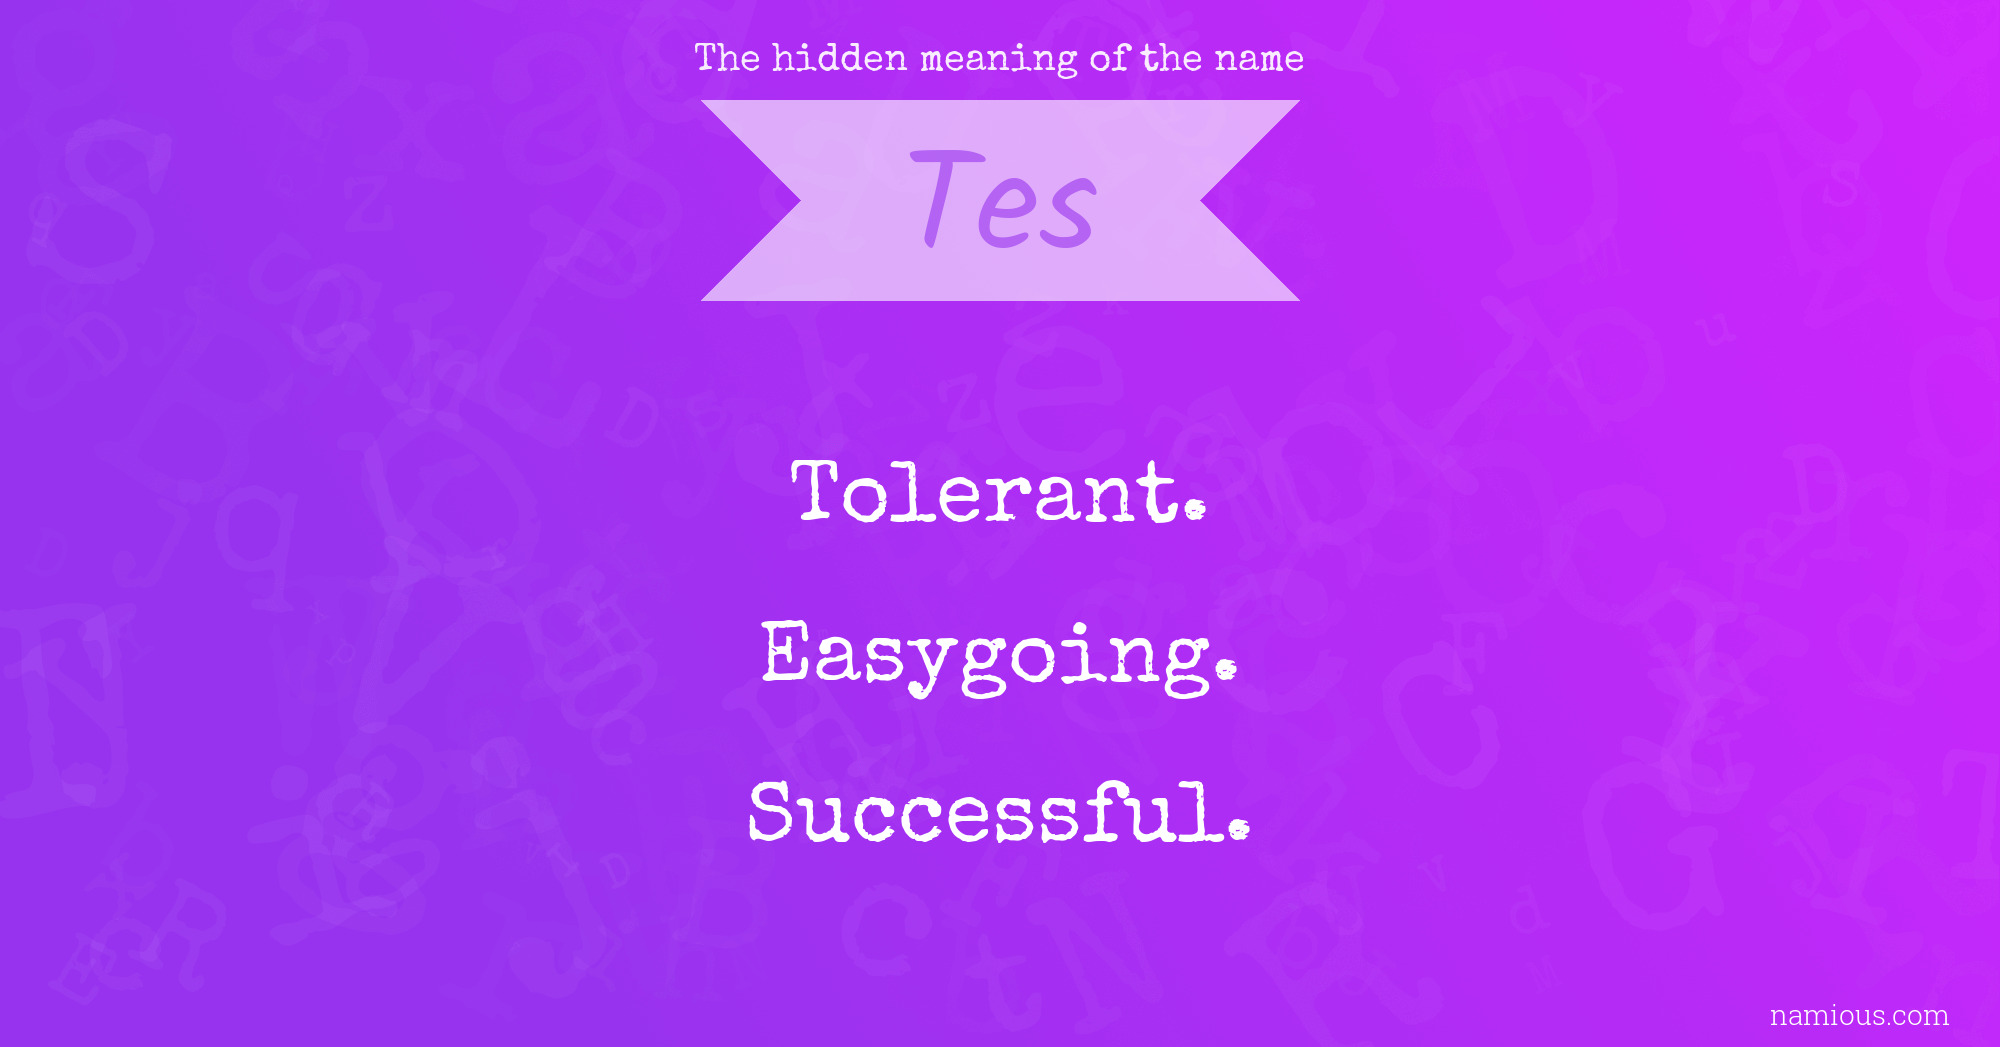 The hidden meaning of the name Tes